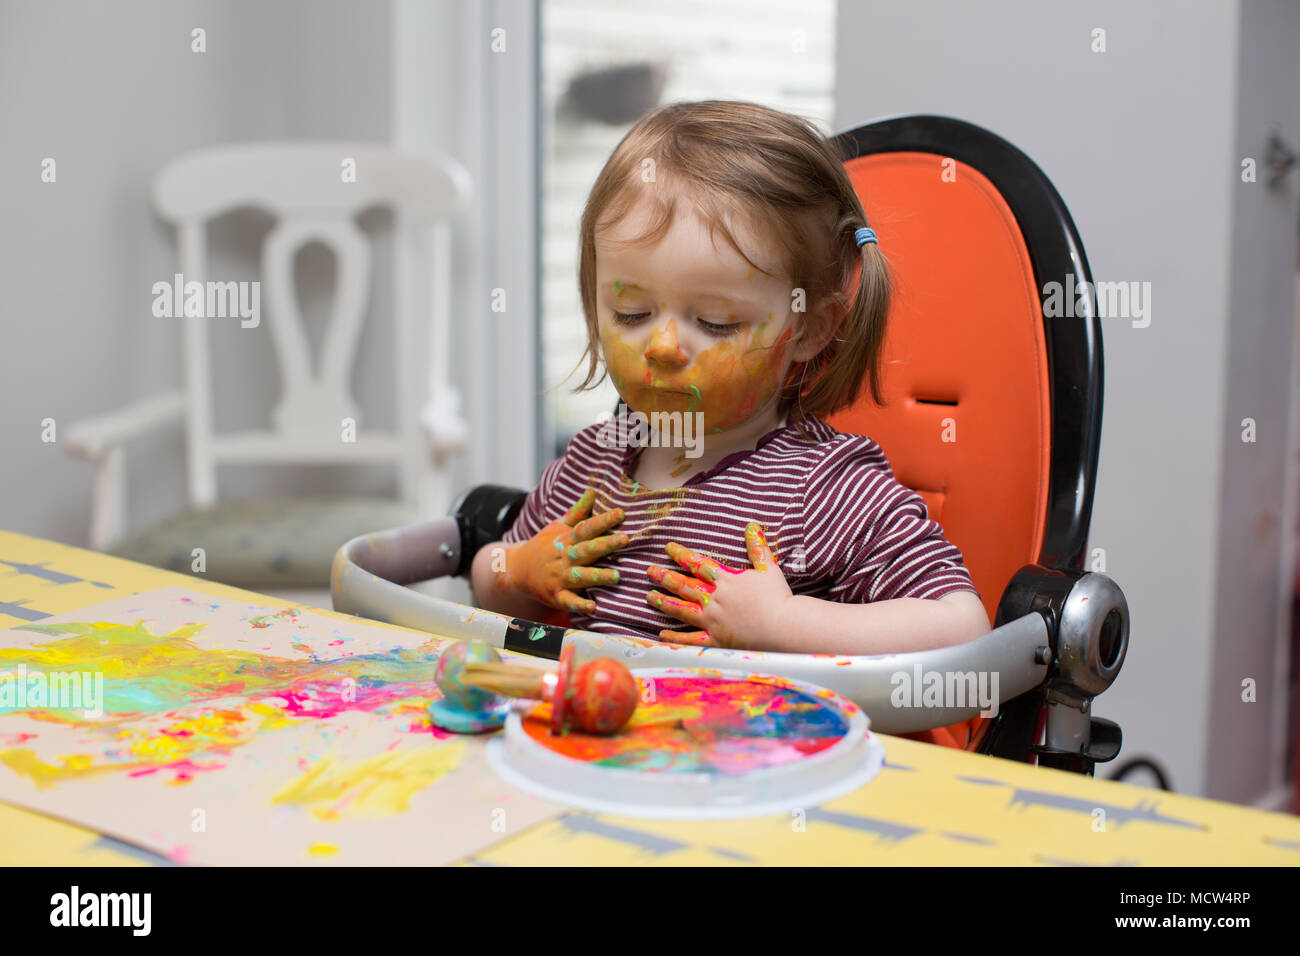 Toddler painting at home Stock Photo